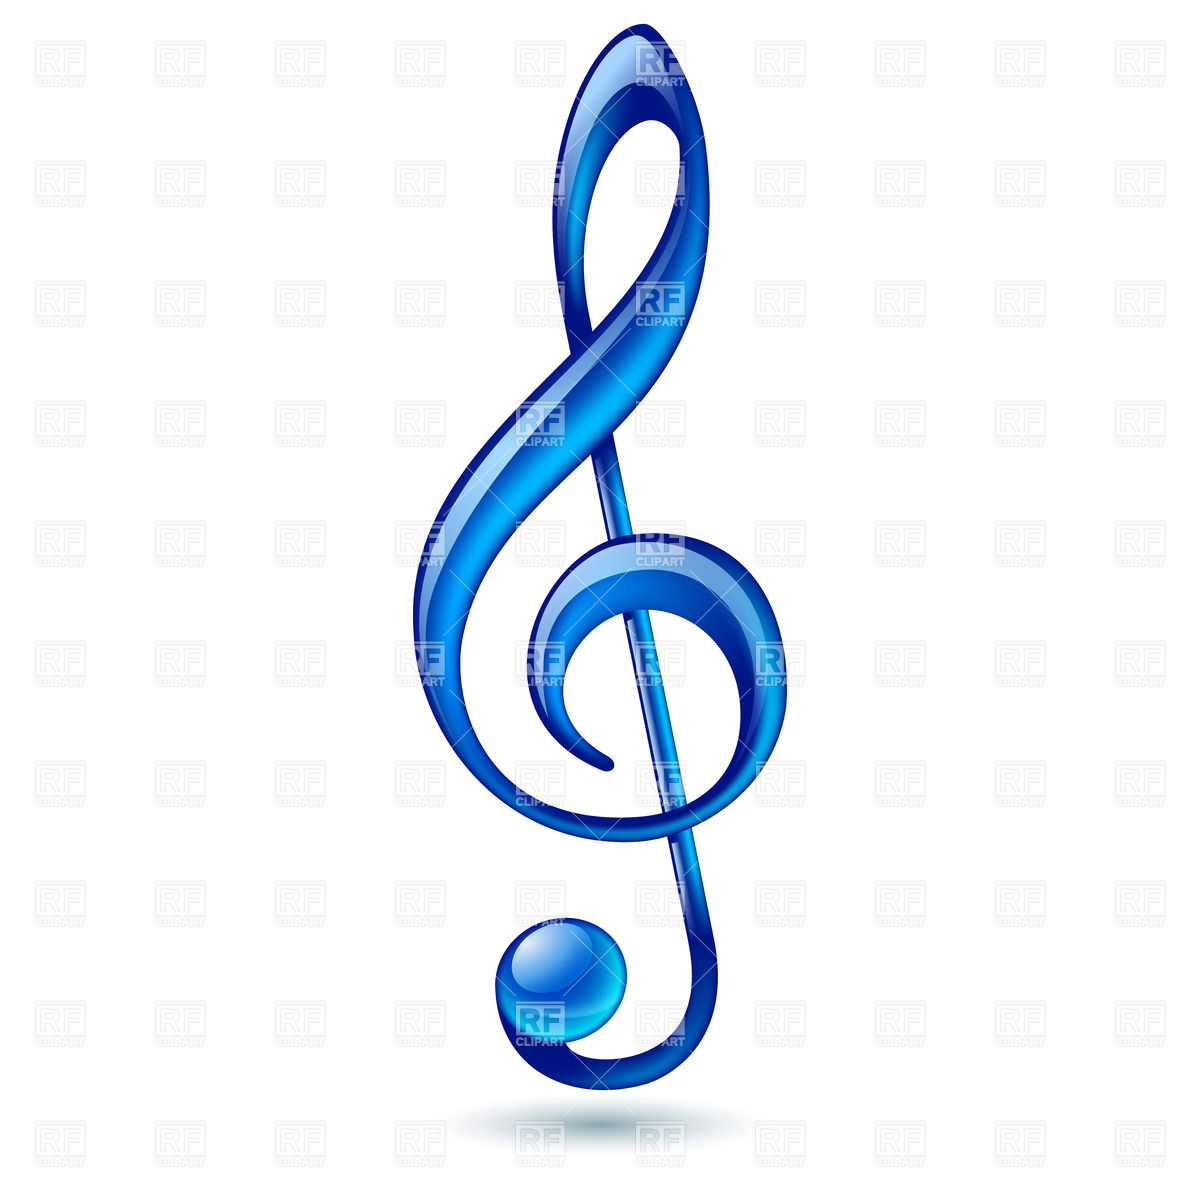 Shiny blue treble clef on white background Royalty Free Vector Clip Art